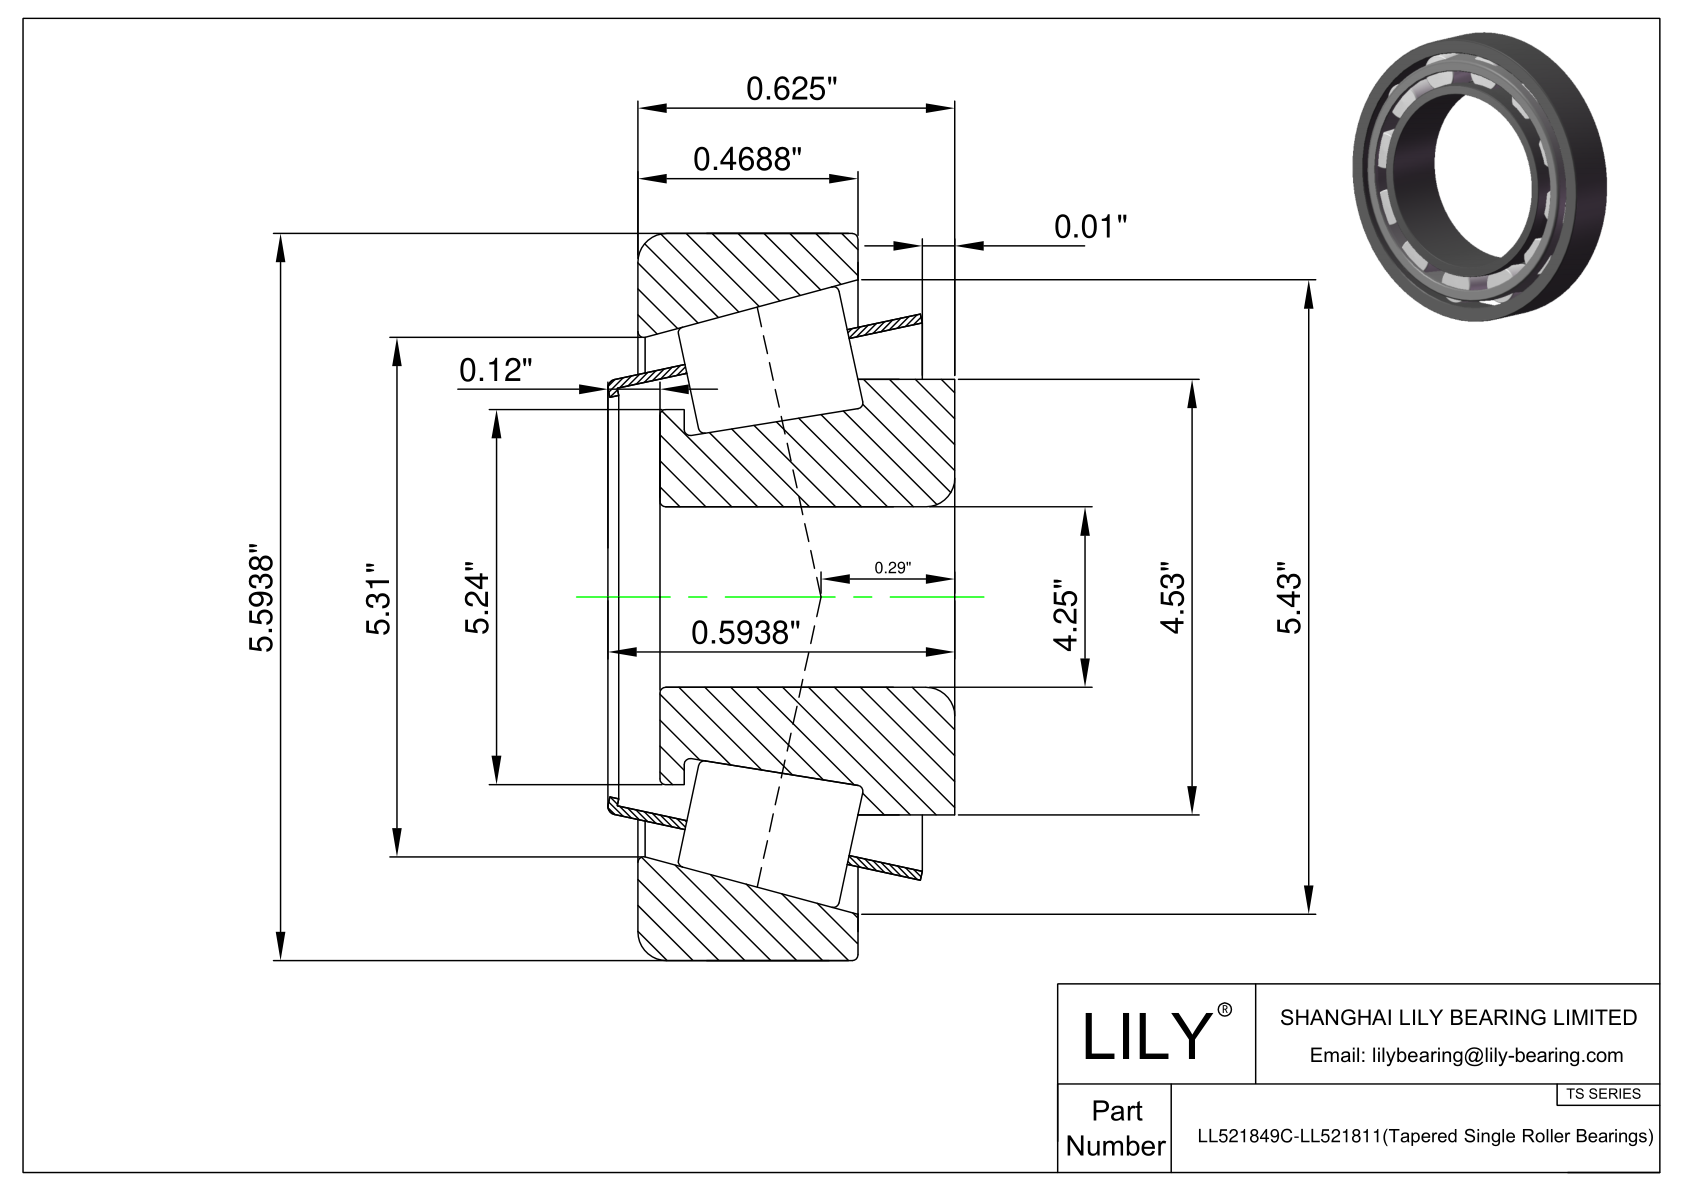 LL521849C-LL521811 TS (Tapered Single Roller Bearings) (Imperial) cad drawing